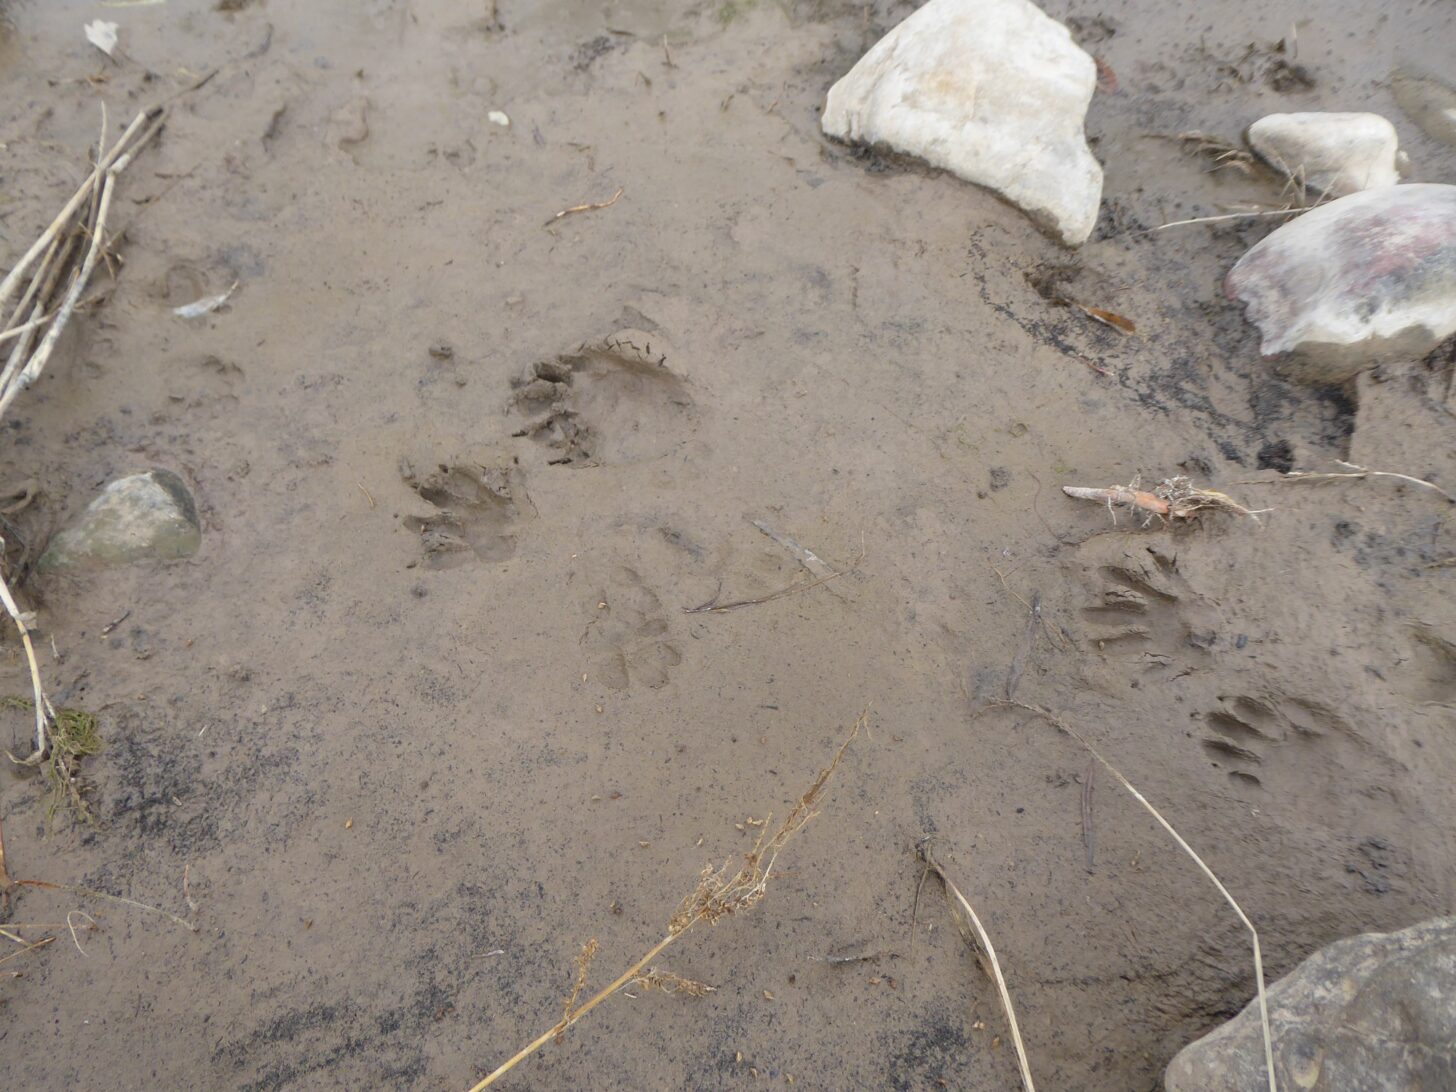 a patch of mud with animal tracks